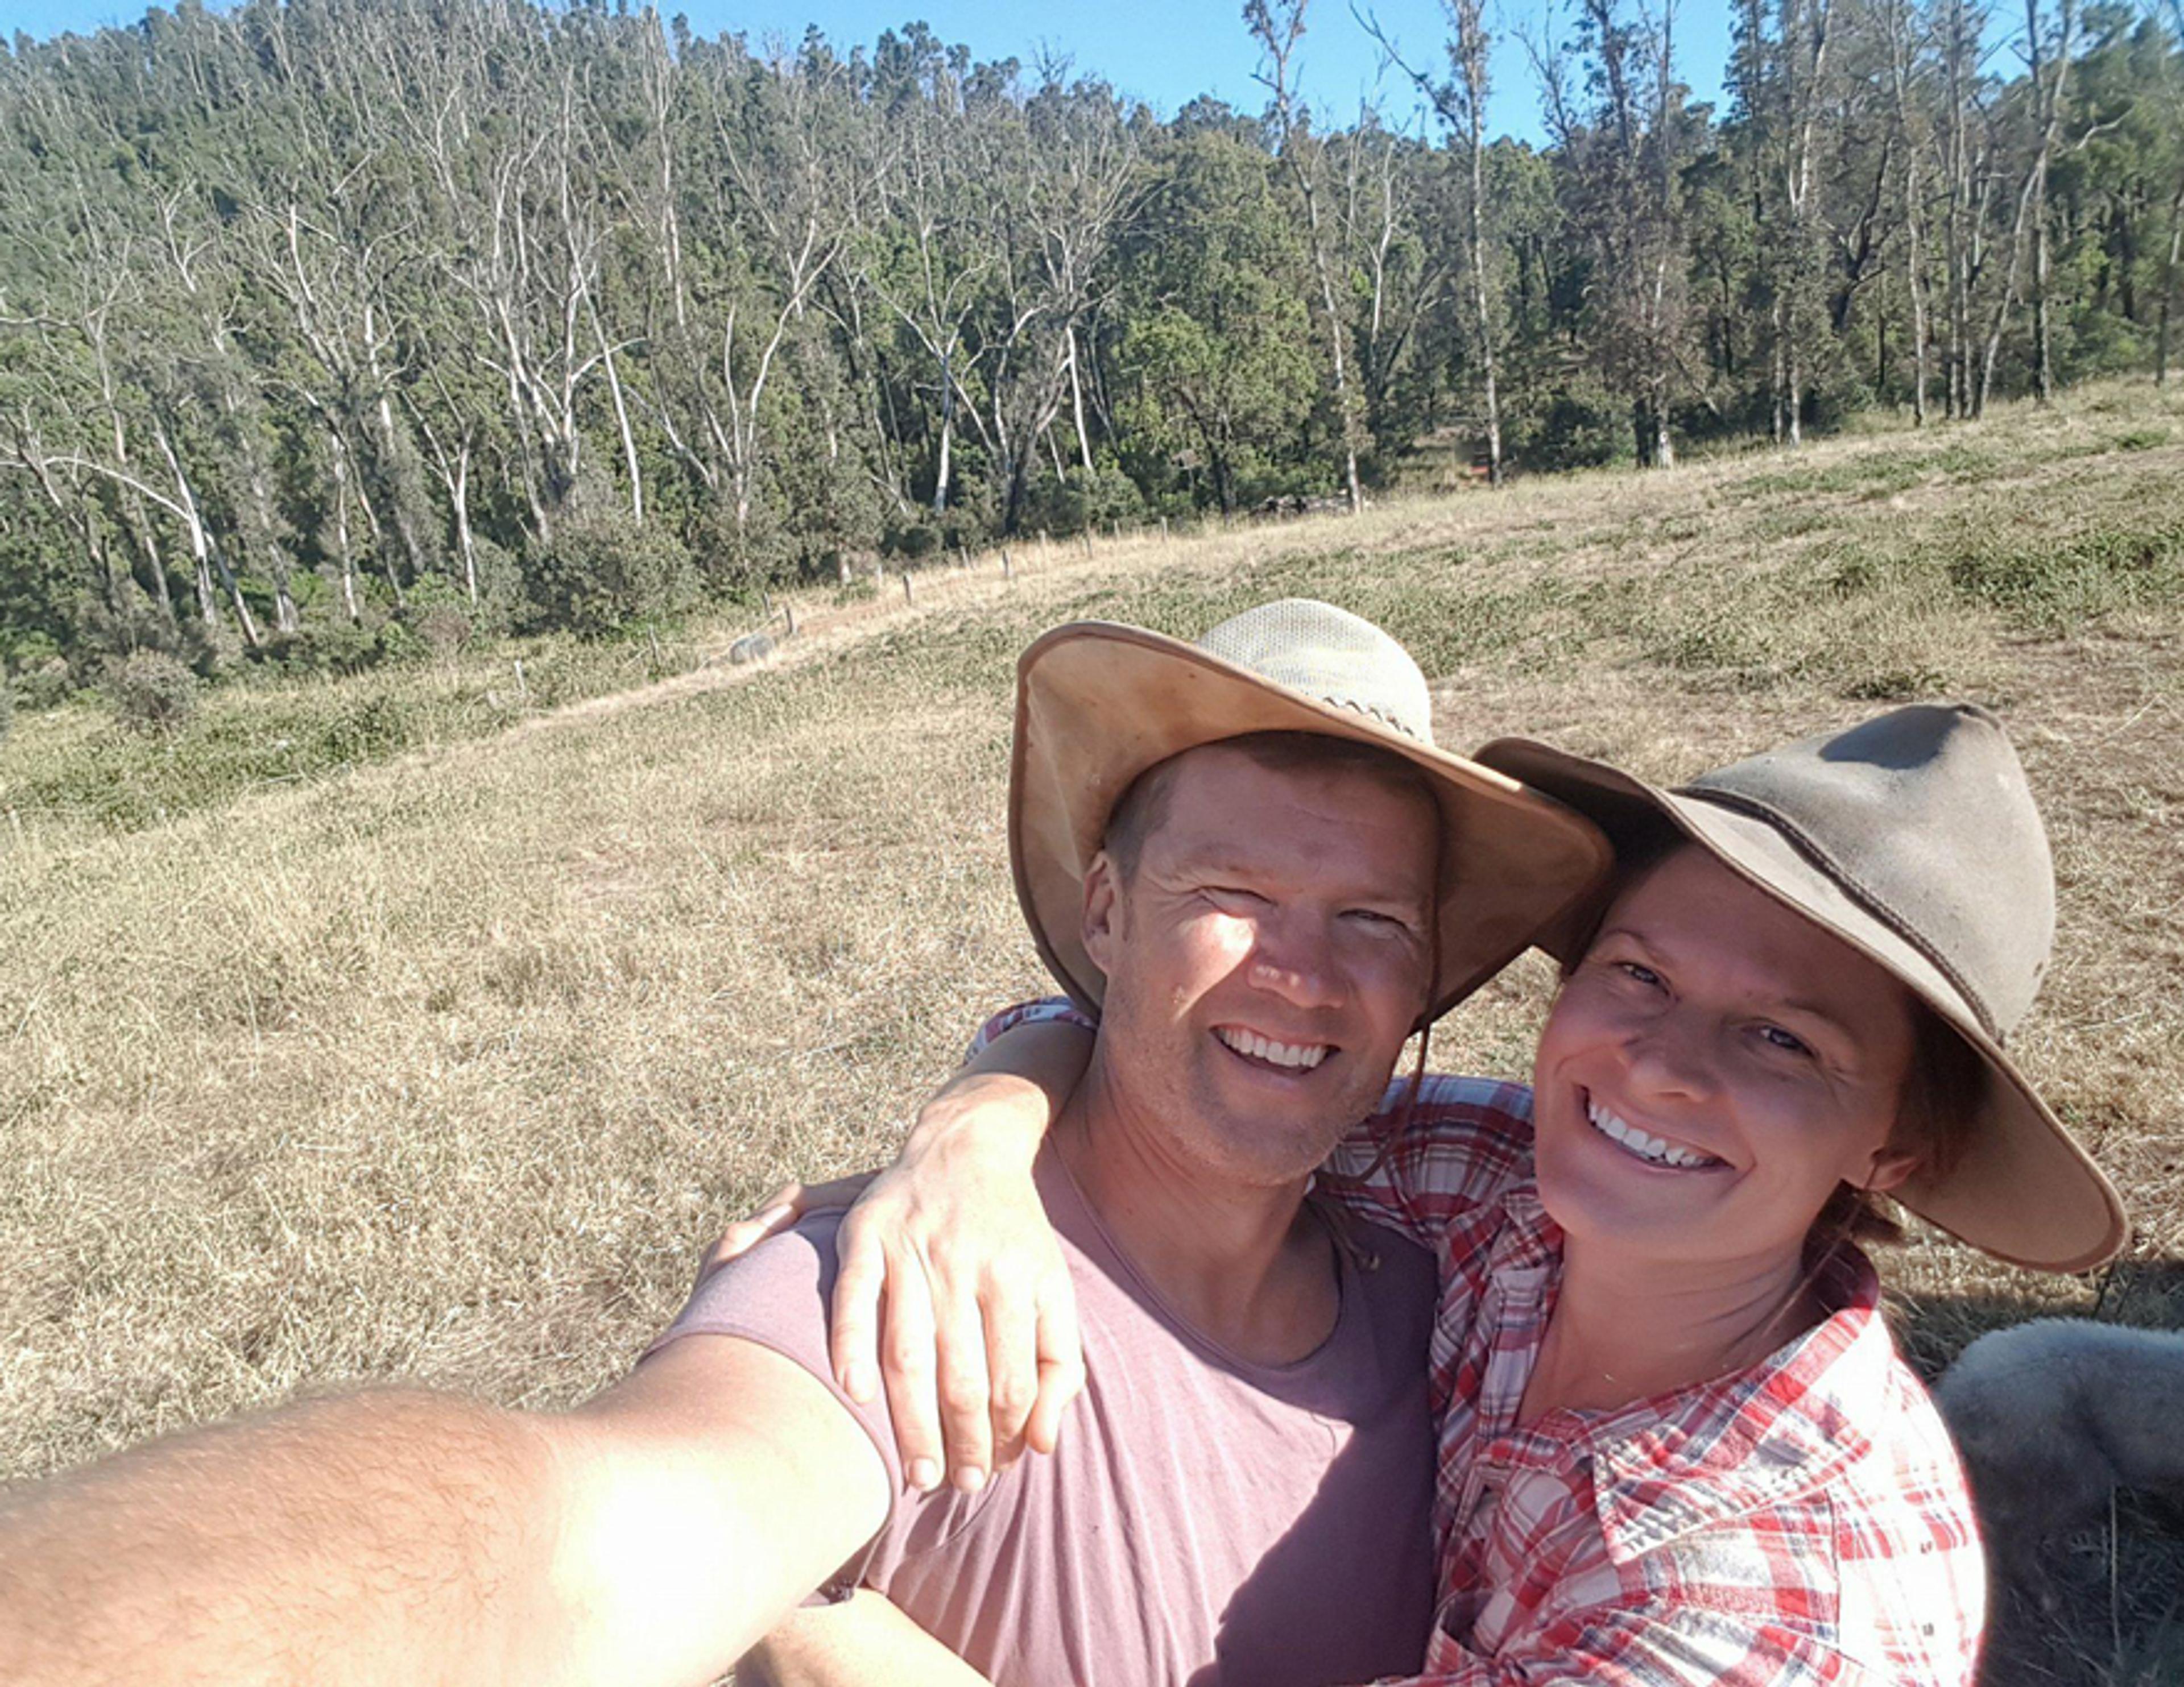 Two people taking a selfie in a paddock on a sunny day. The sky is blue and there are a lot of trees in the background next to the paddock. The people are smiling and hugging.